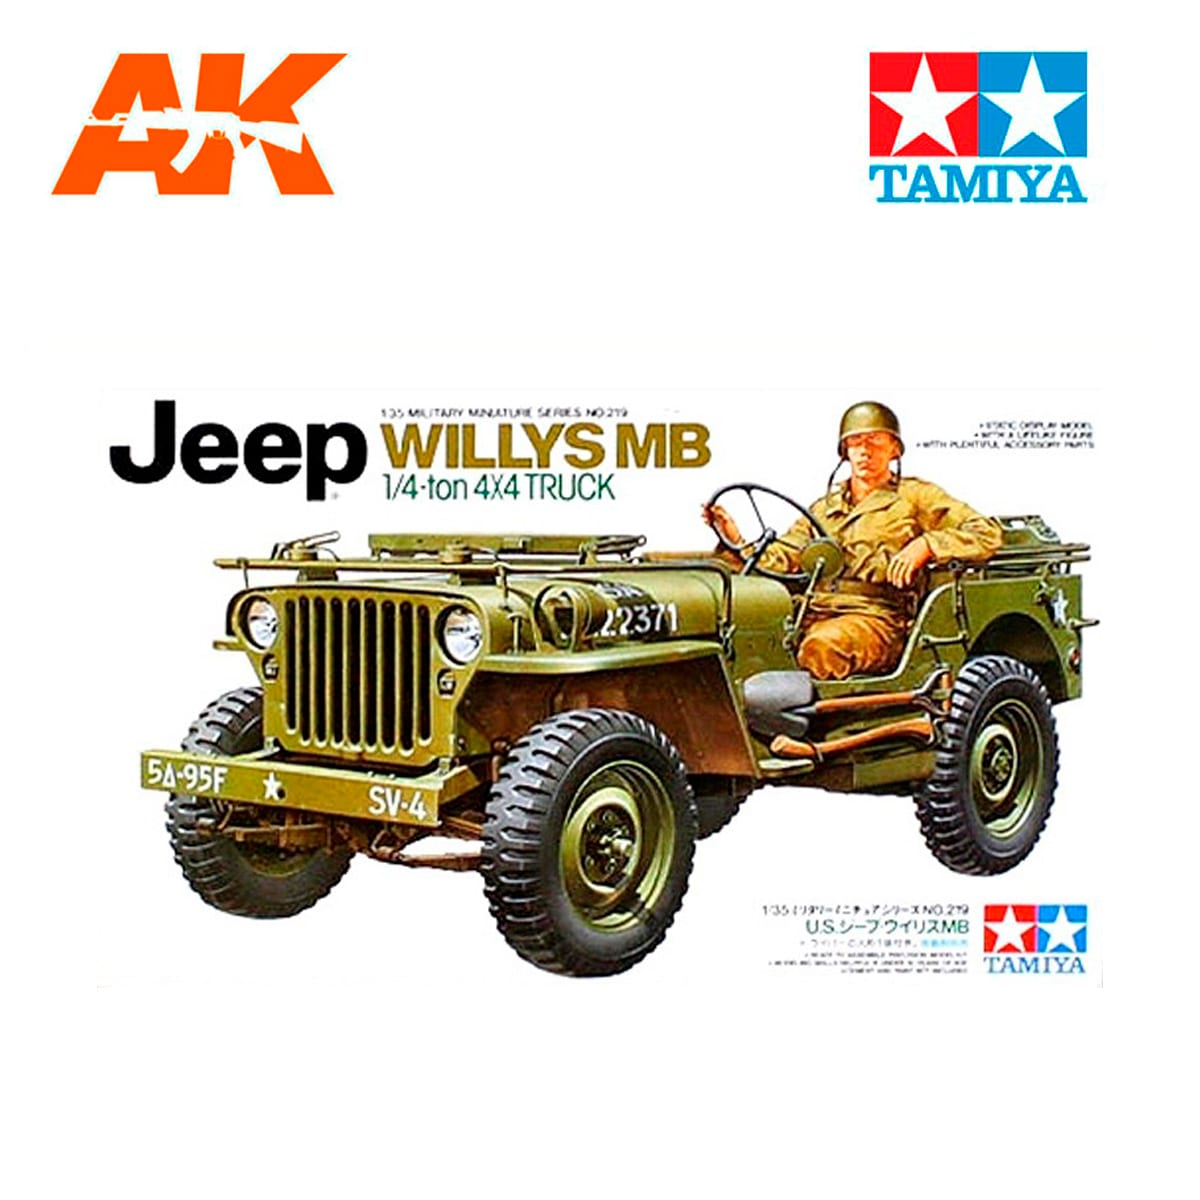 1/35 Jeep Willys MB. 1/4Ton Truck AK Interactive The